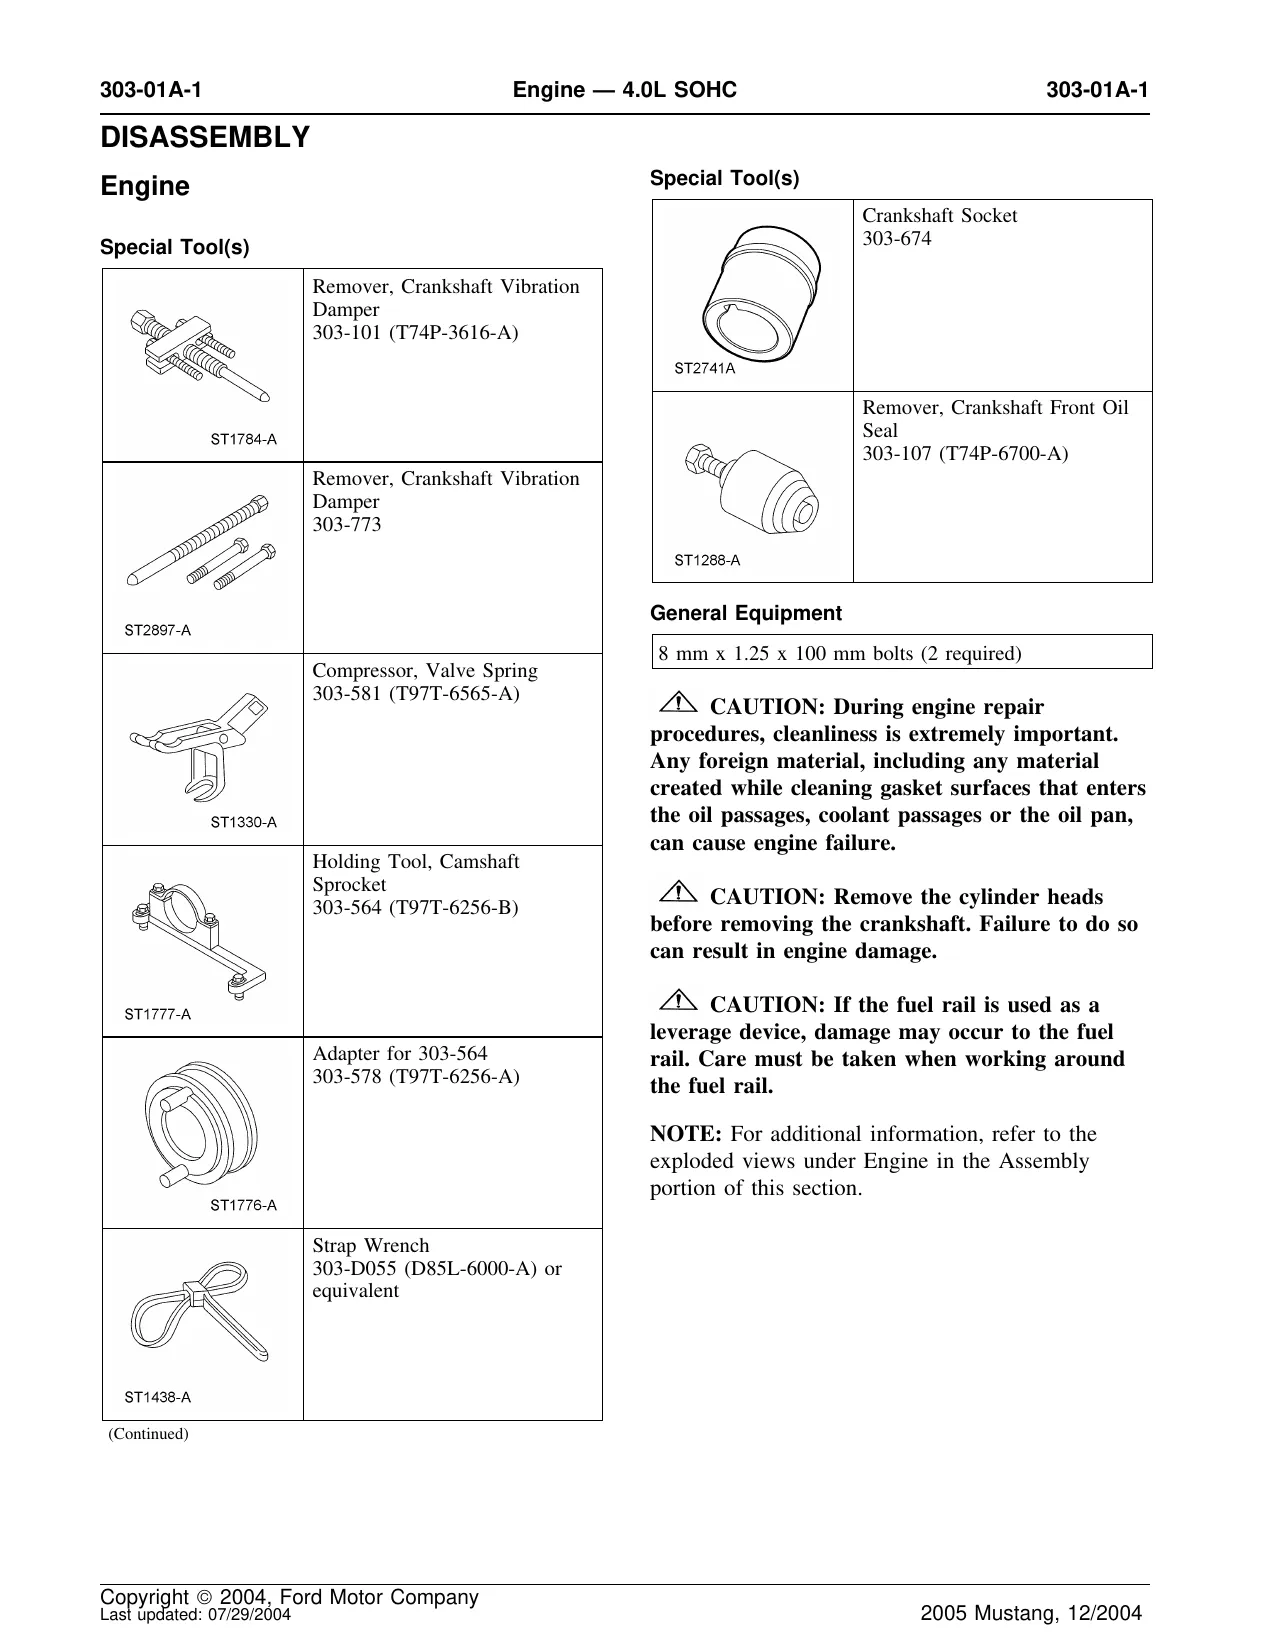 2005-2010 Ford Mustang service manual Preview image 1